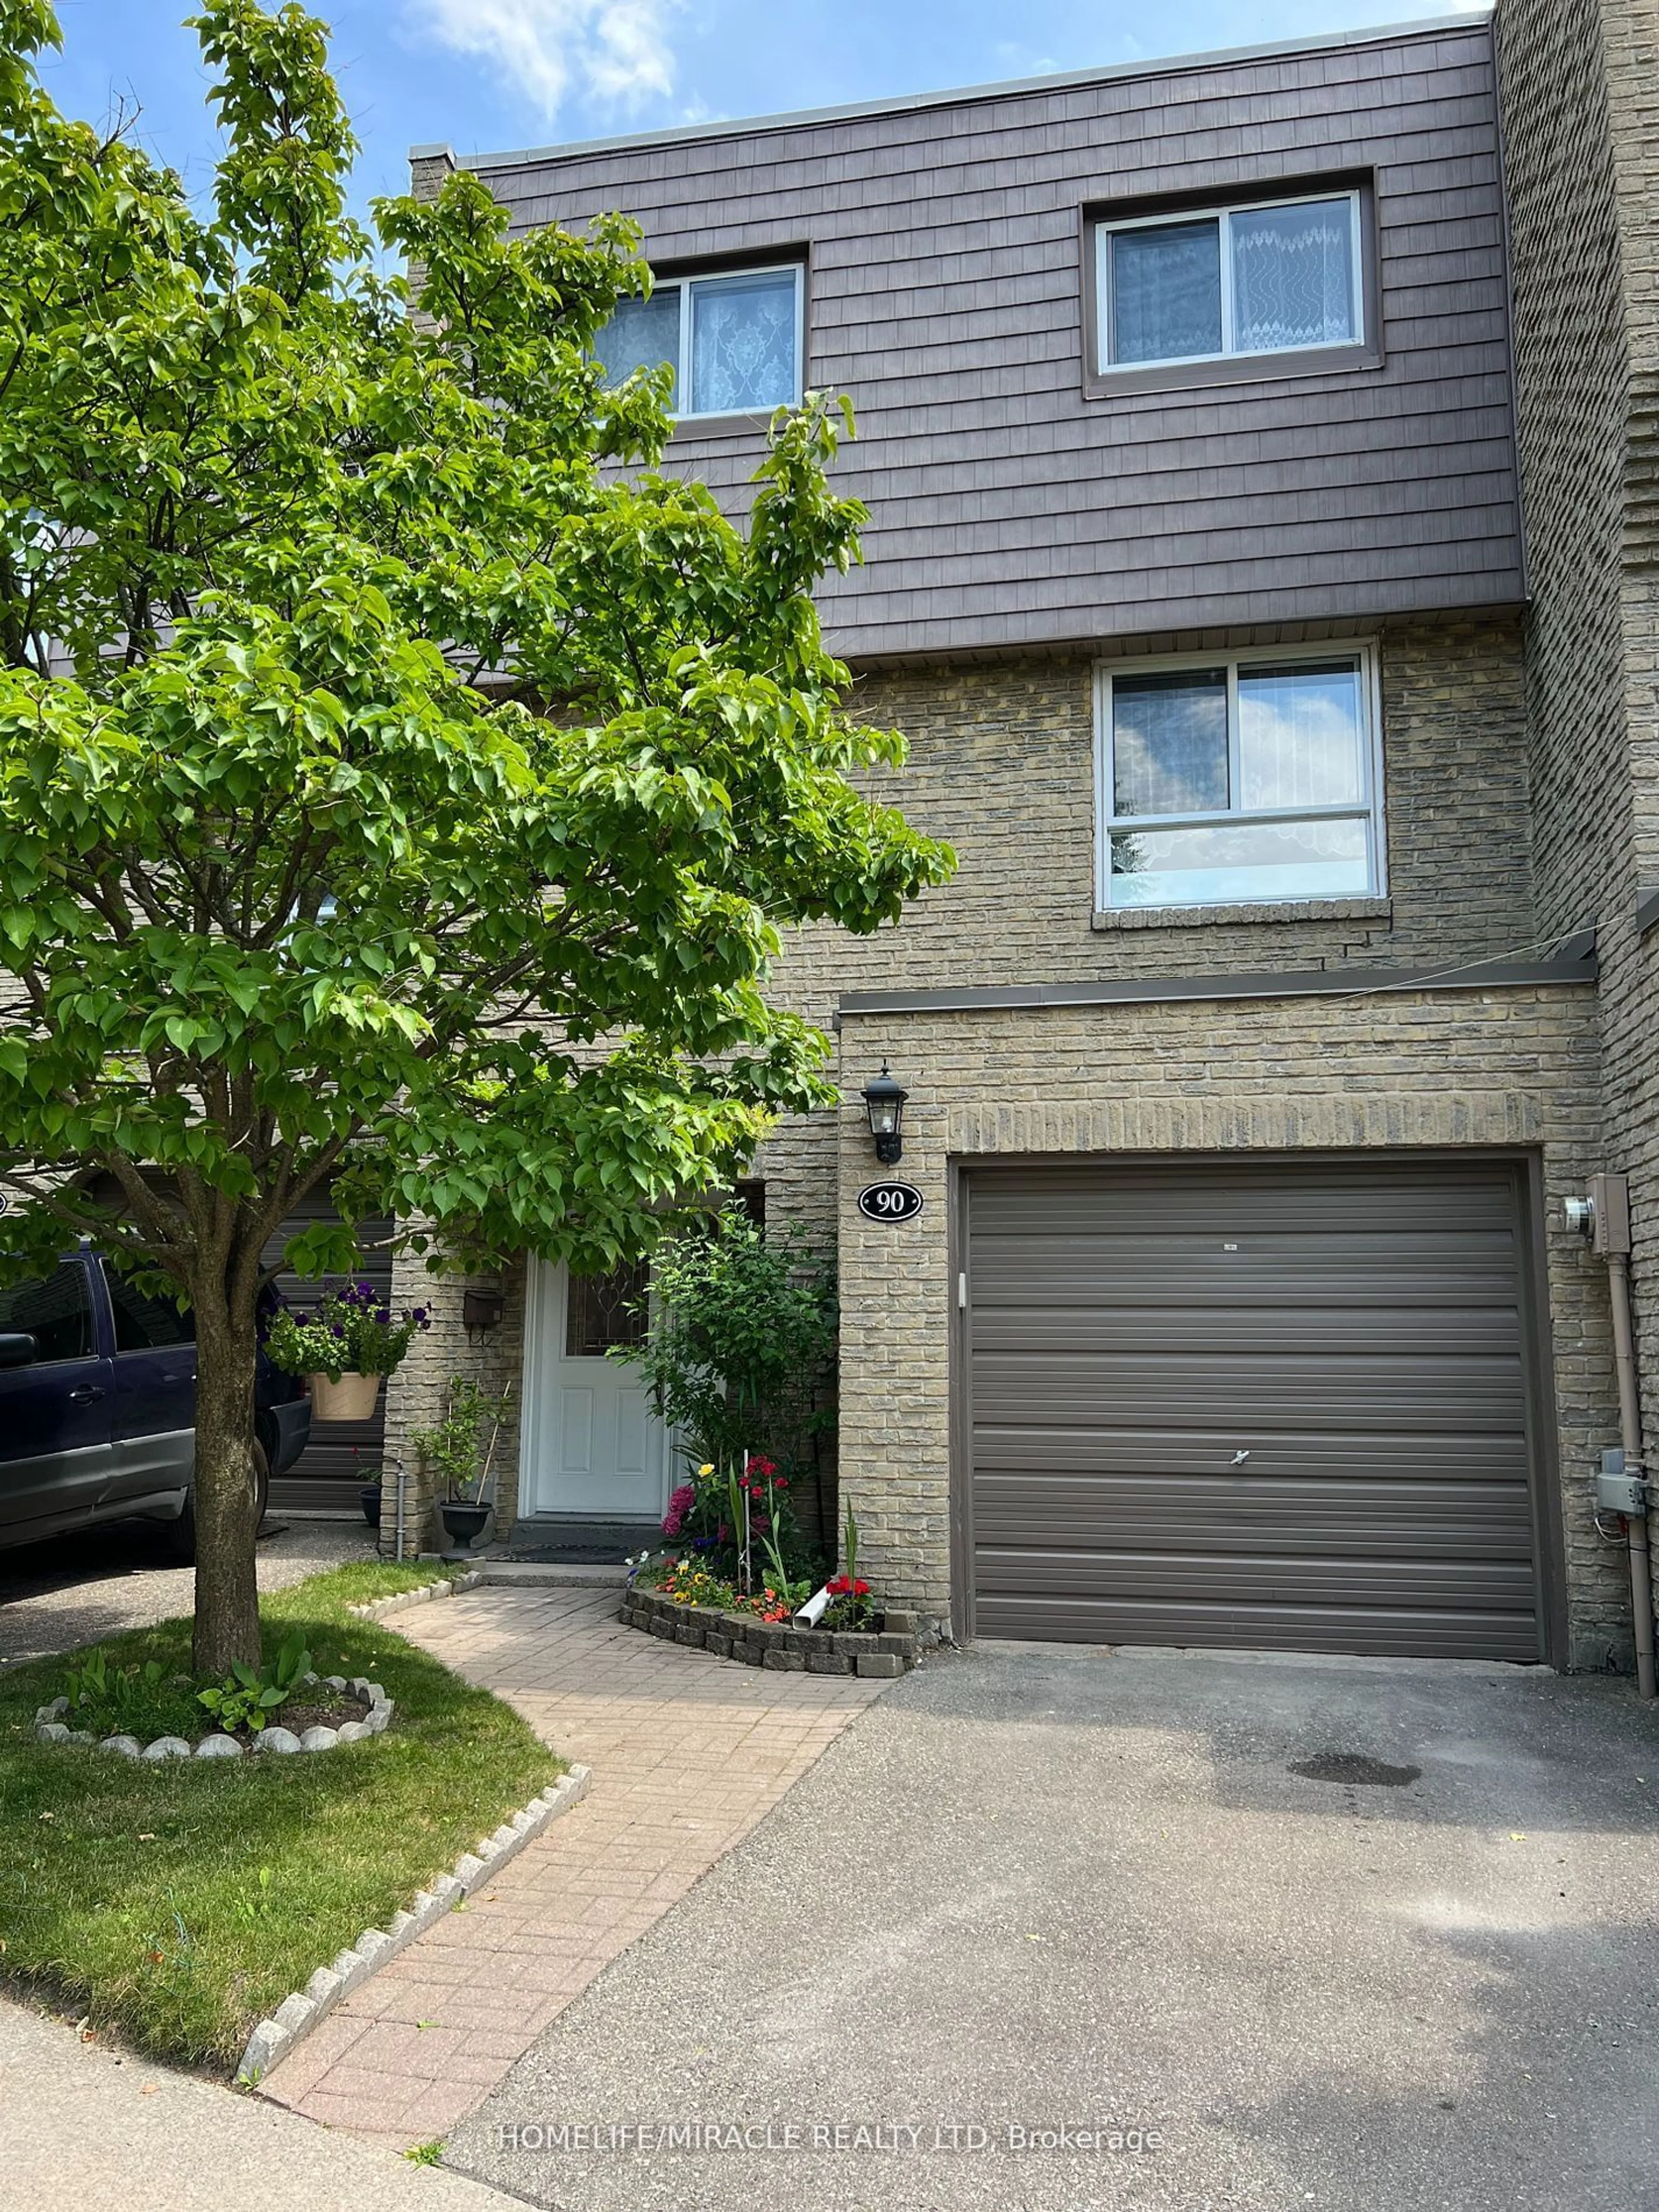 A pic from exterior of the house or condo for 405 Hyacinthe Blvd #90, Mississauga Ontario L5A 3N1